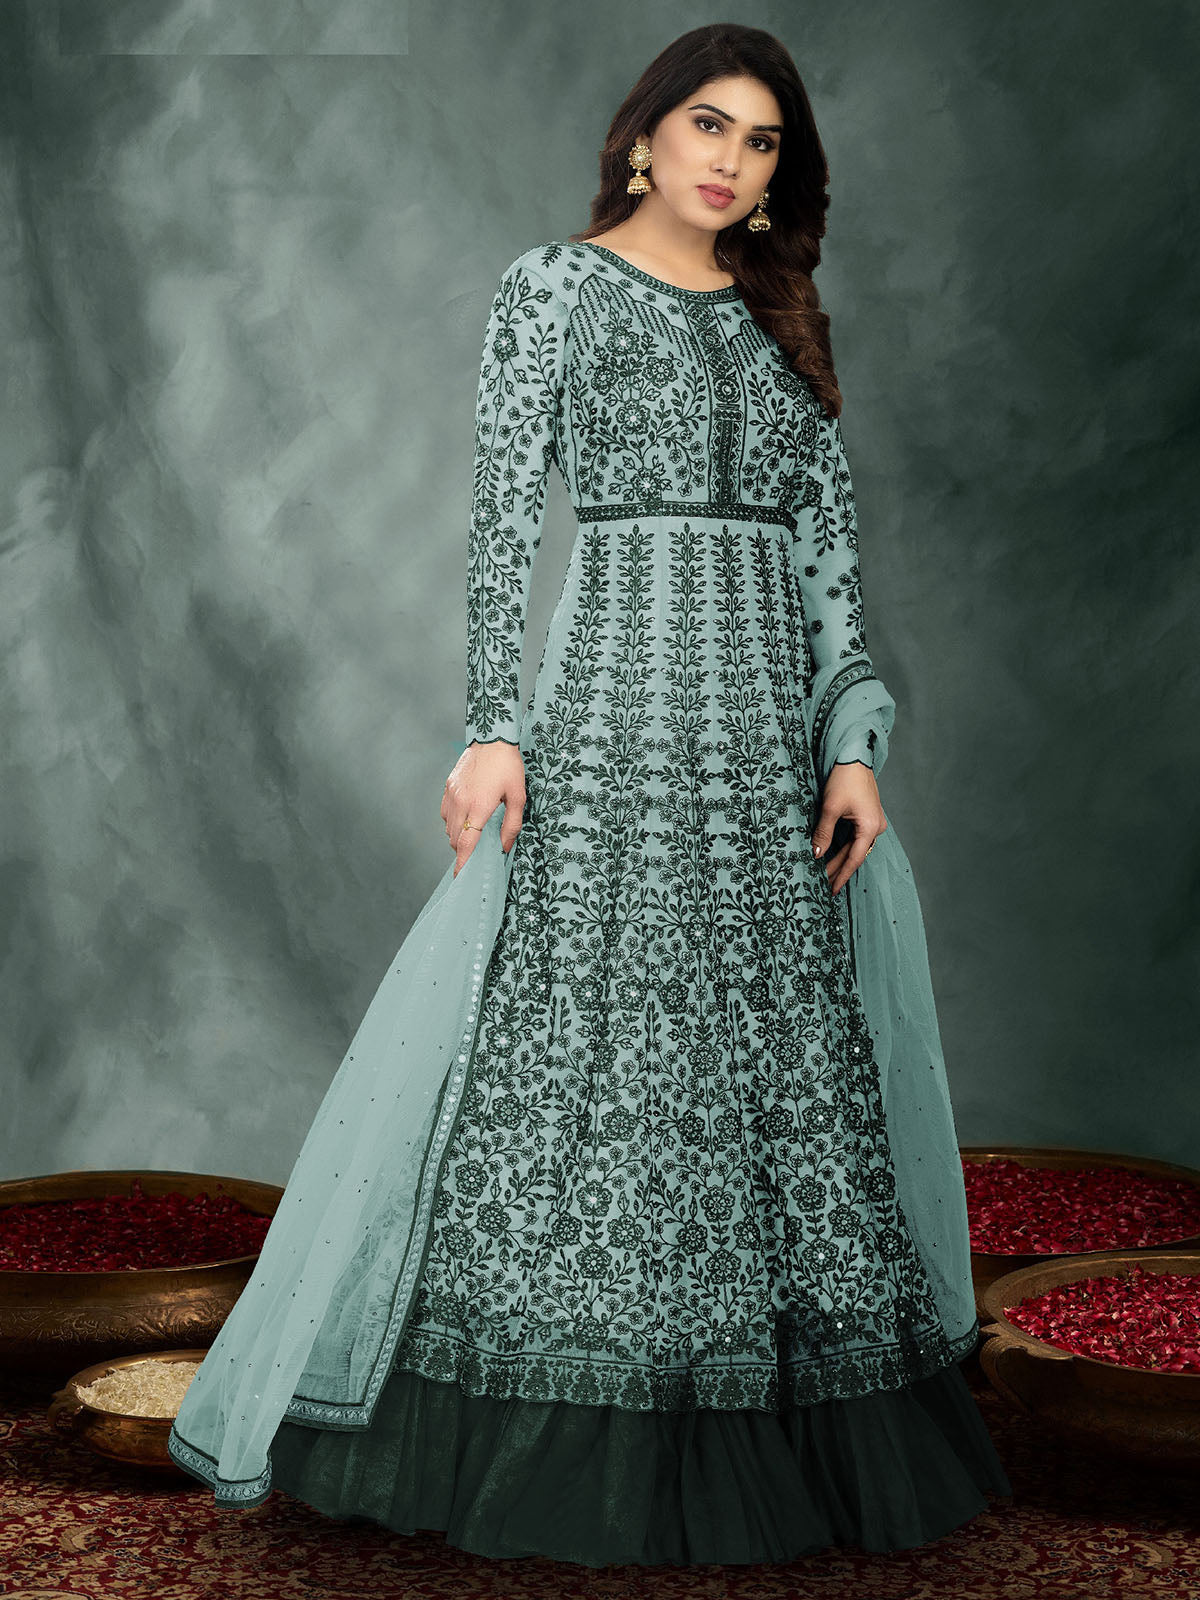 Dark Green Colored Partywear Embroidered Netted Semi Stitched Anarkali Suit